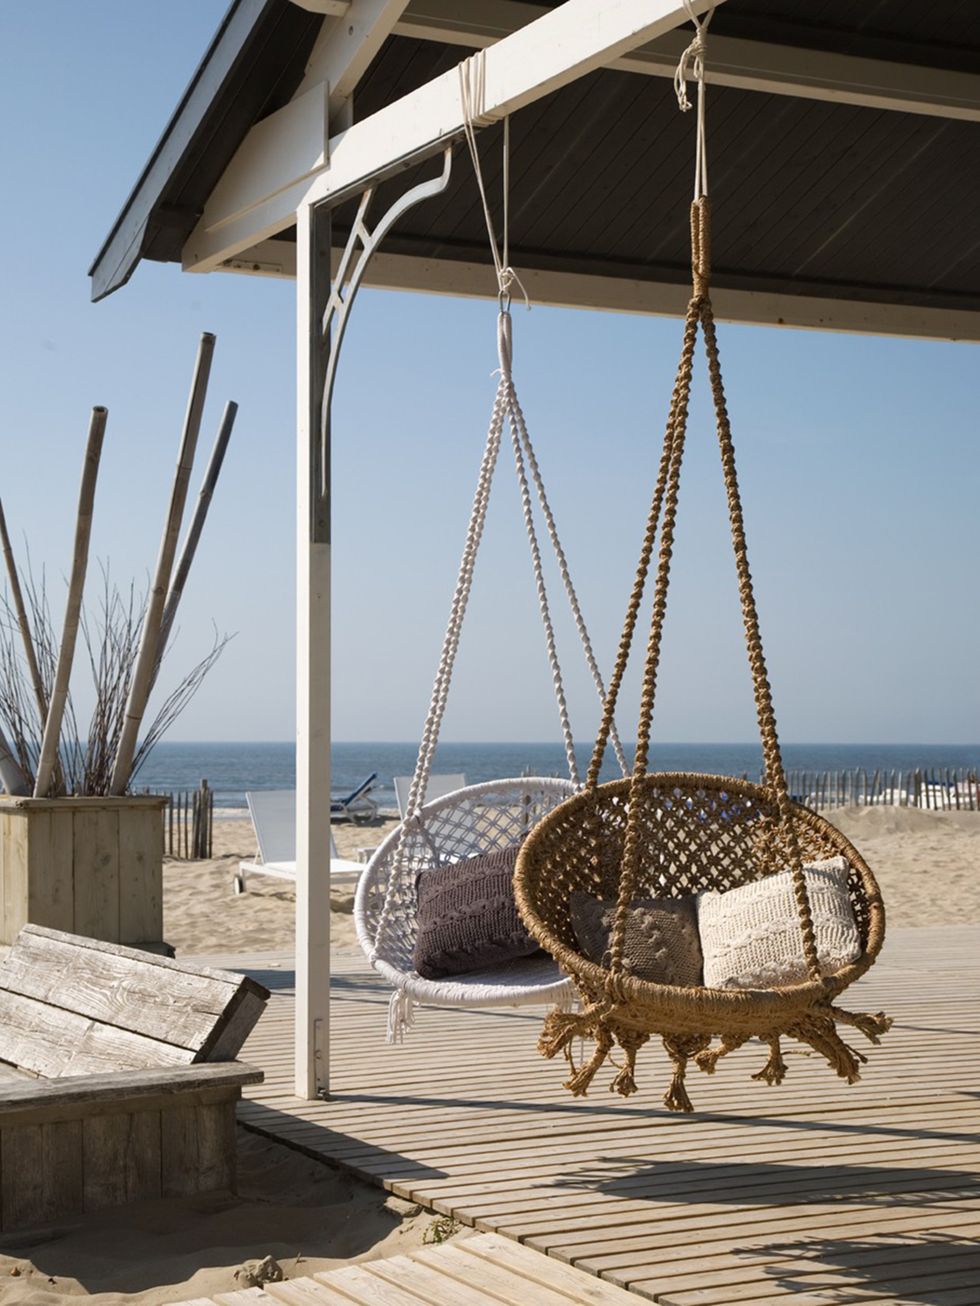 Swing, Shade, Iron, Metal, Cobblestone, Beach, Building material, Basket, Outdoor structure, Wicker, 